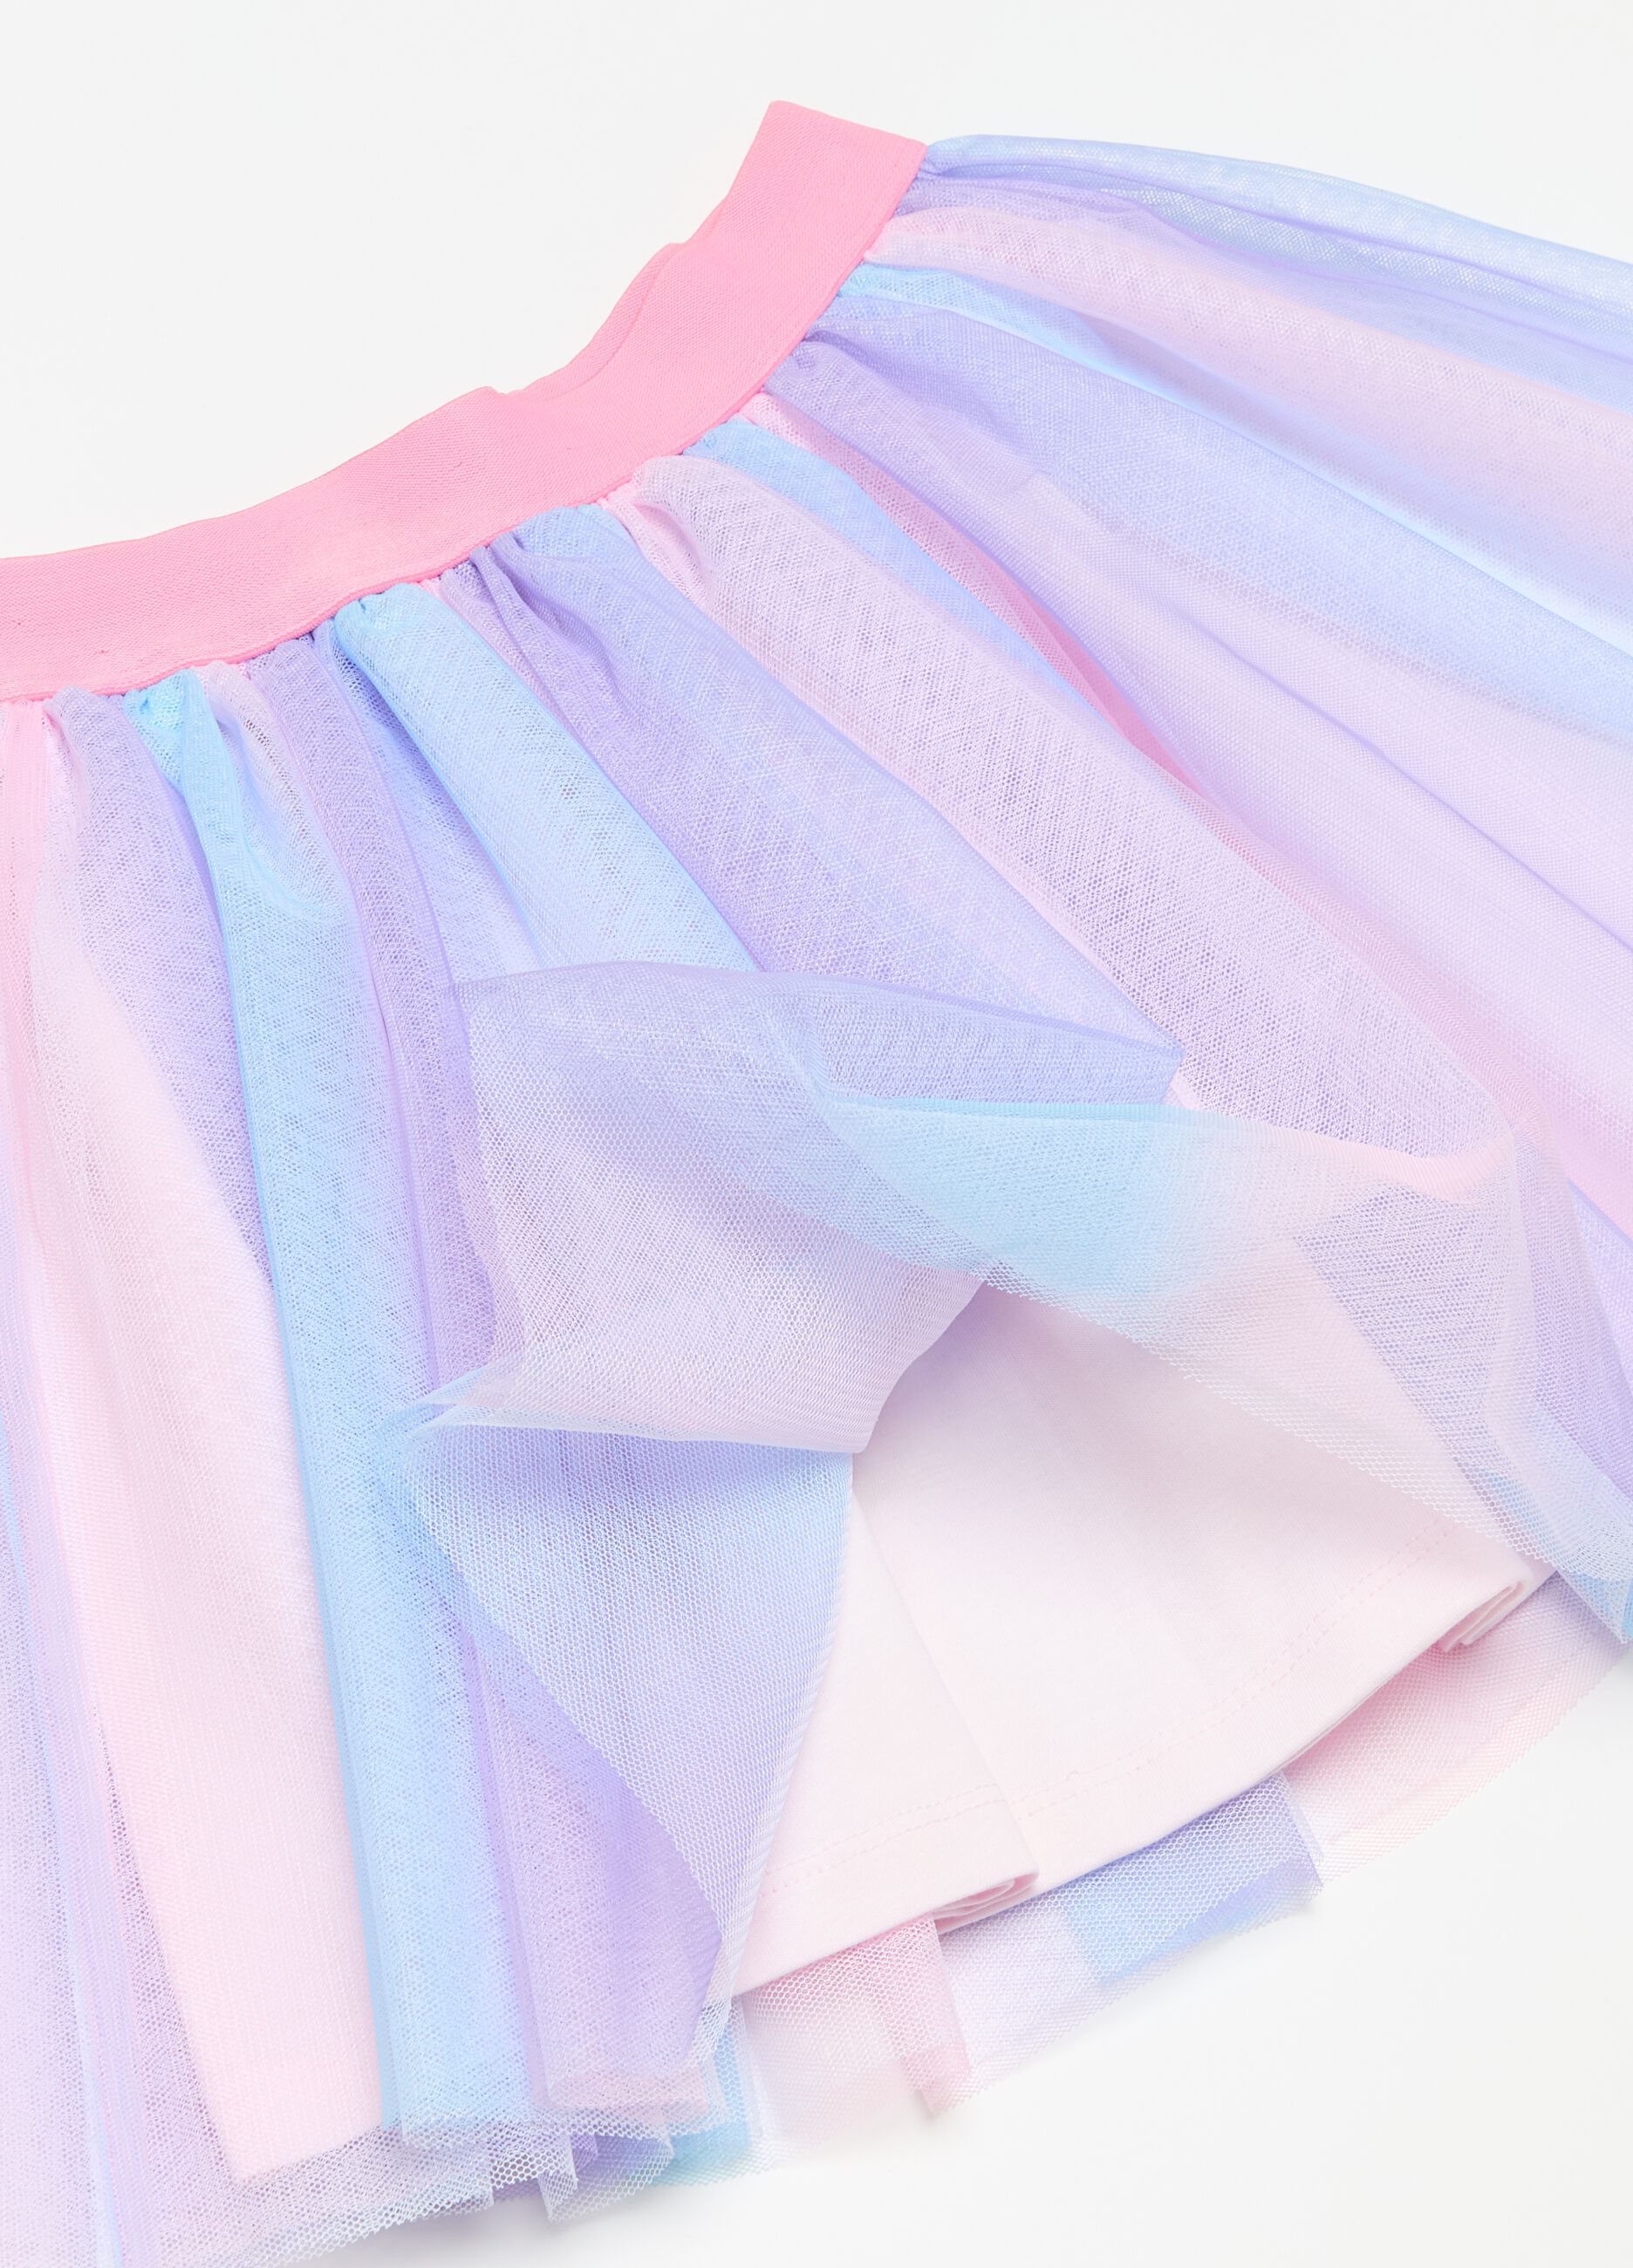 Tulle skirt with dip-dye pattern